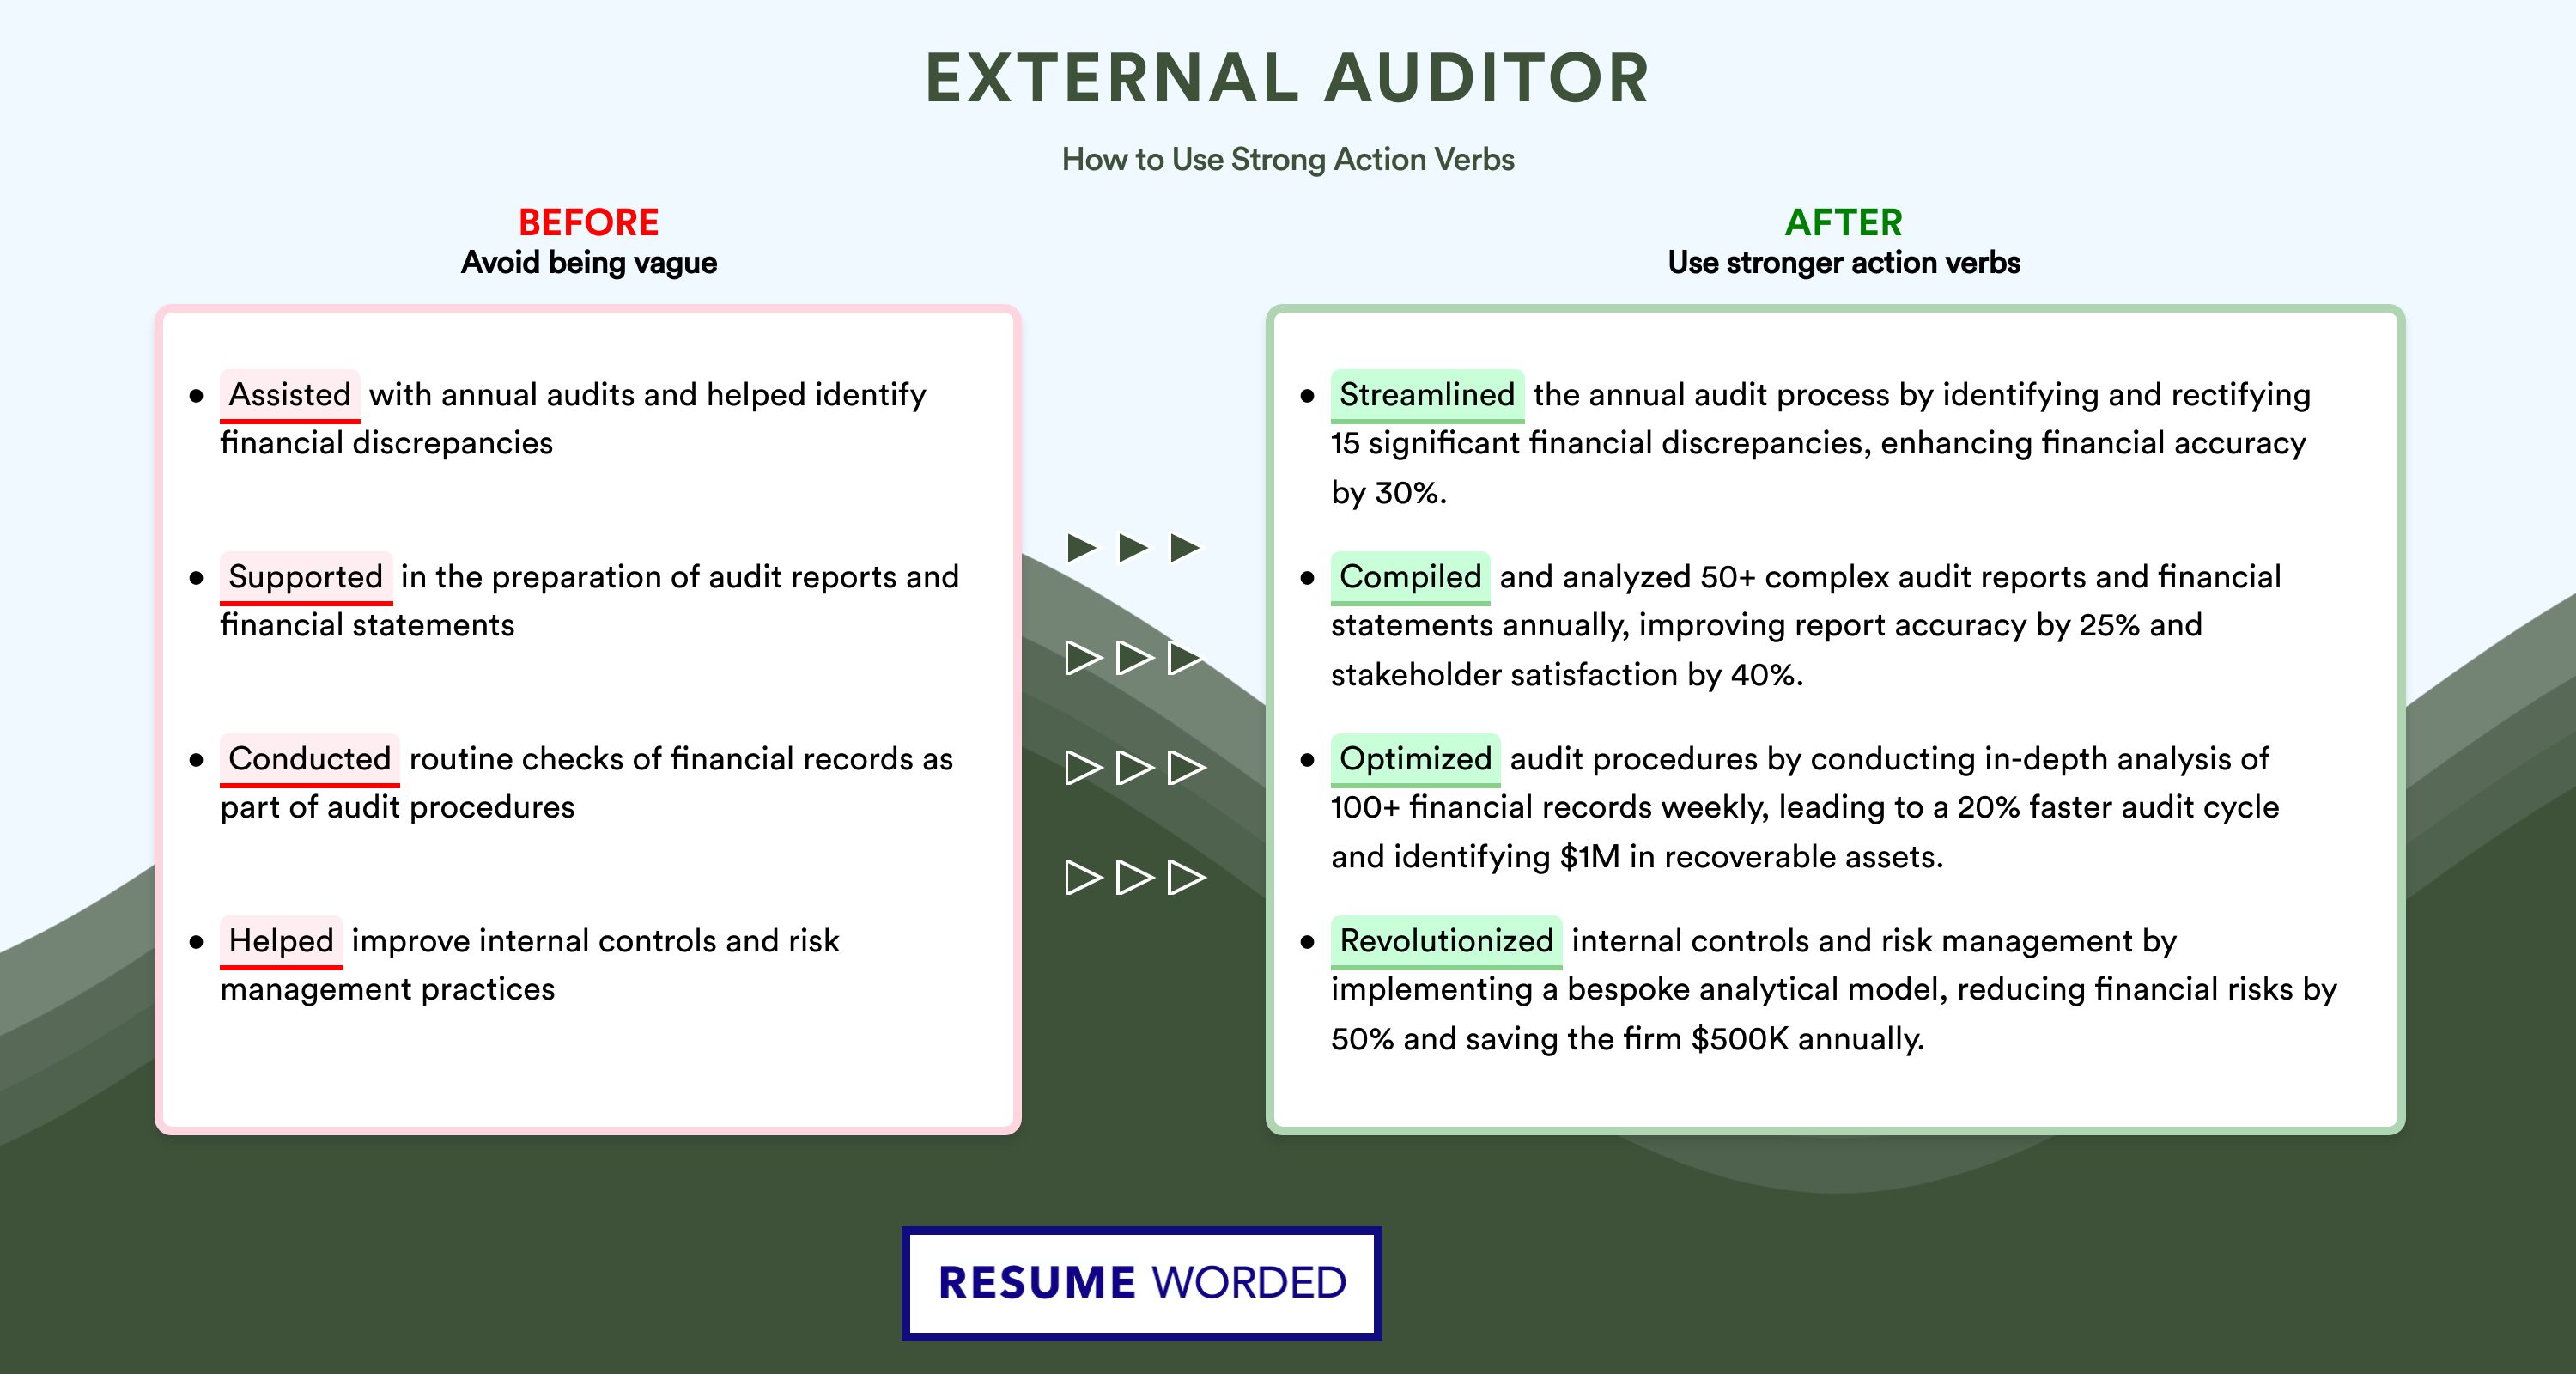 Action Verbs for External Auditor